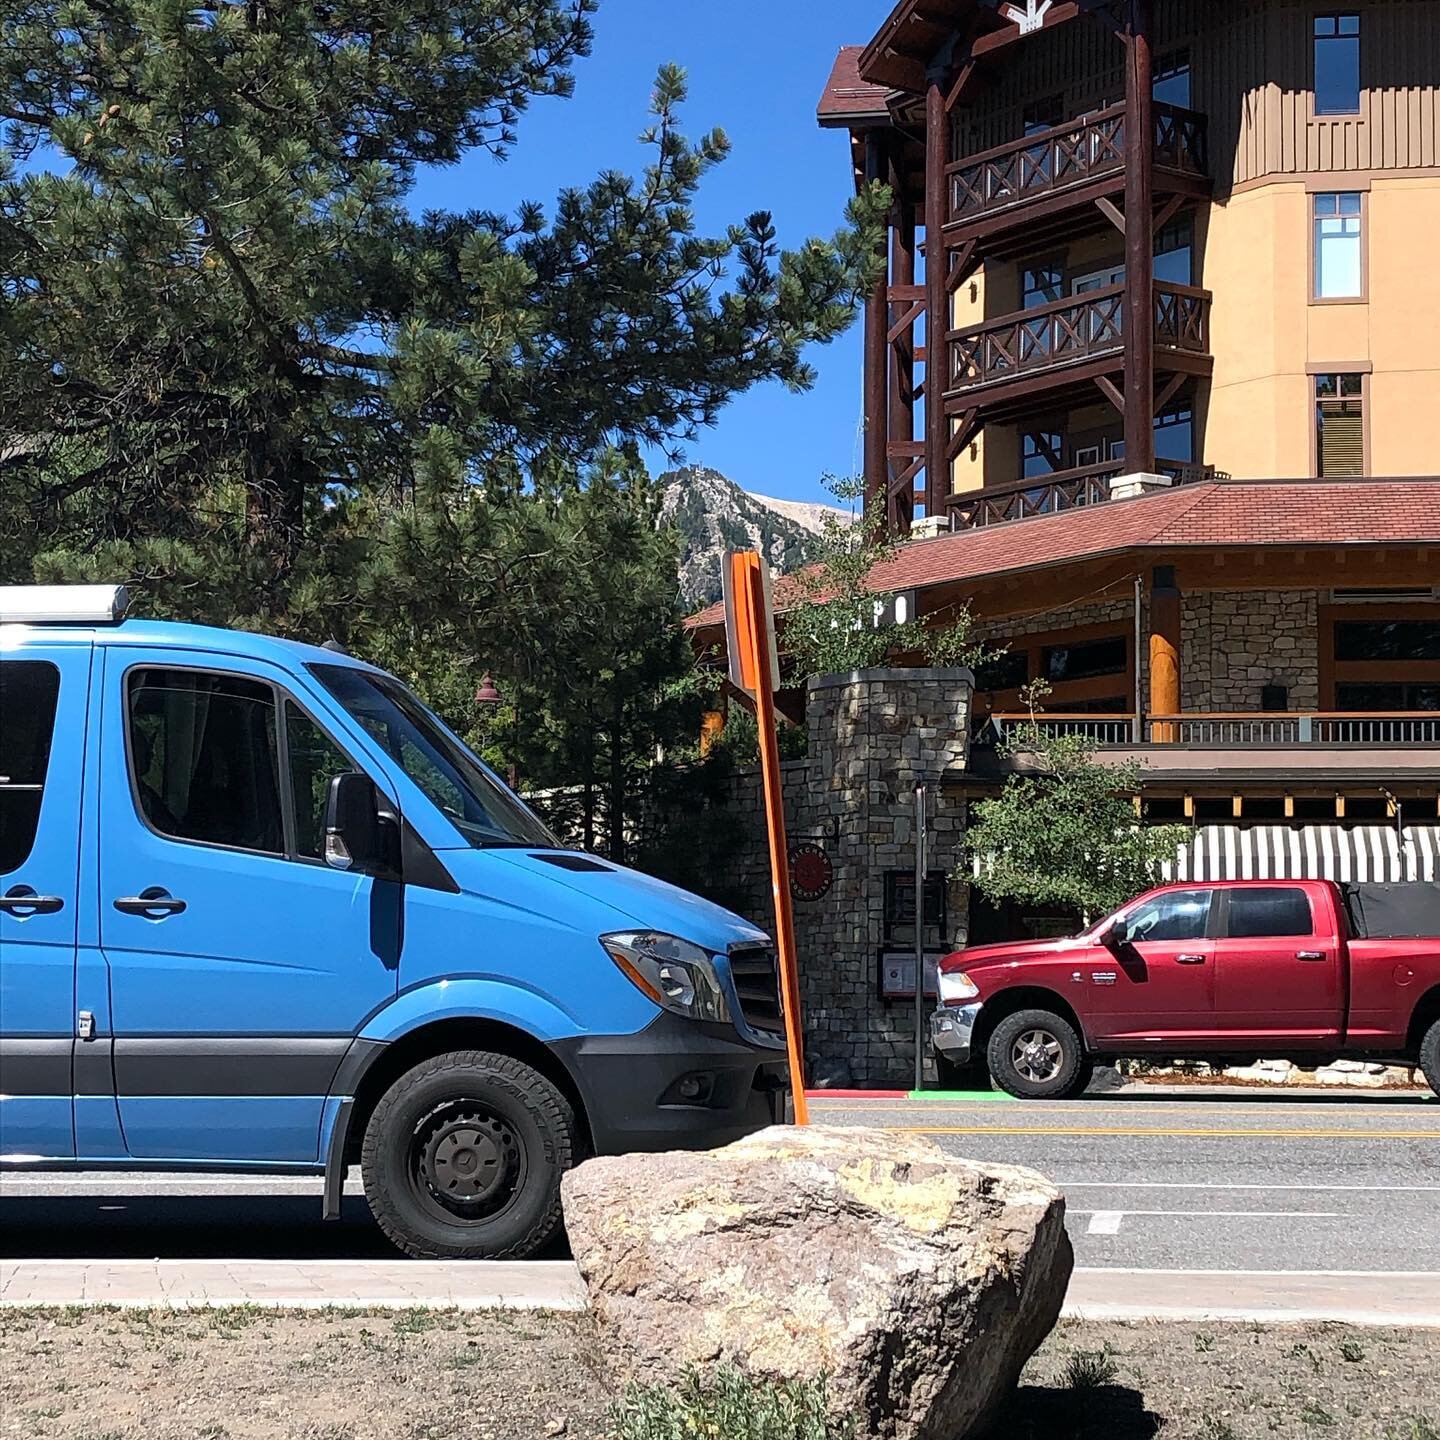 The ReedBrands van is back on tour. Hard to do a &lsquo;quick&rsquo; visit to Mammoth Lakes, but we needed to get the business going again! See you on the road!